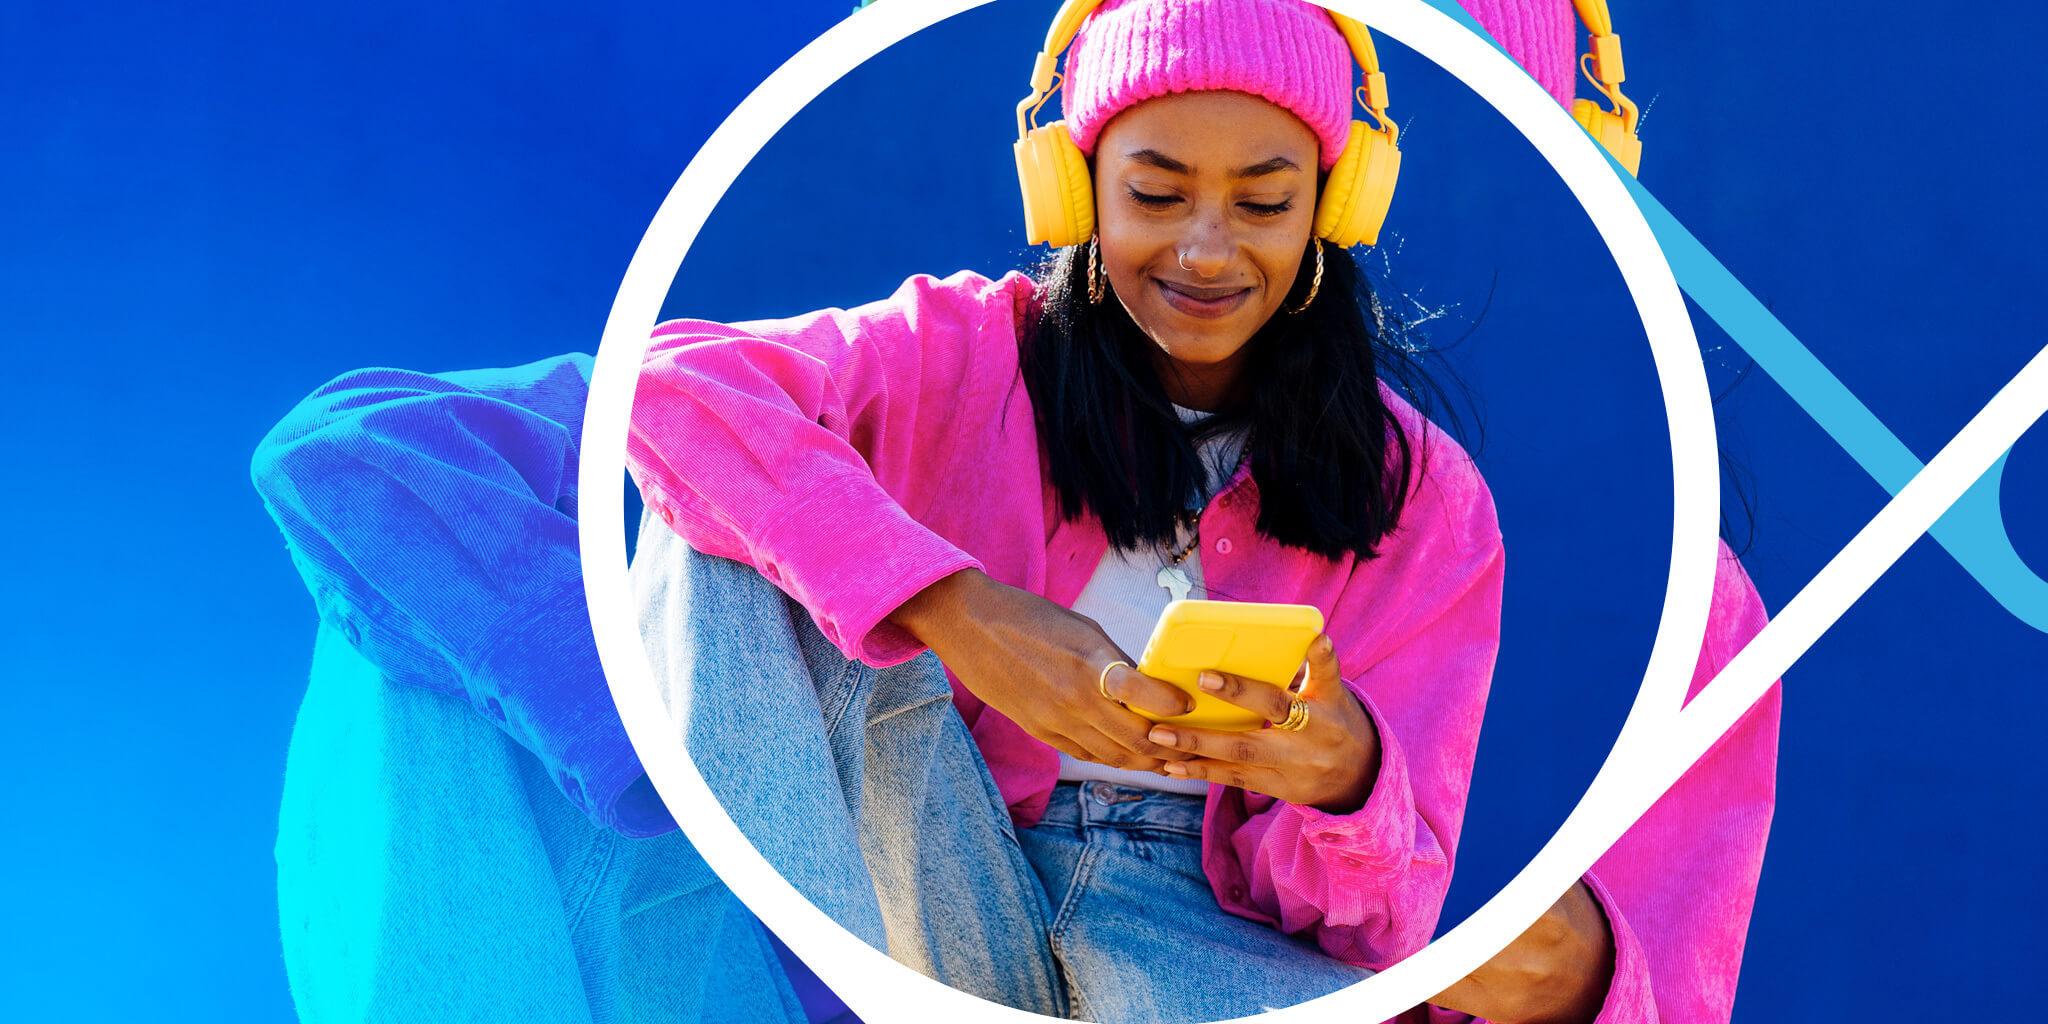 Our latest study explores how young people use digital worlds to explore, express, and find community around their identities.